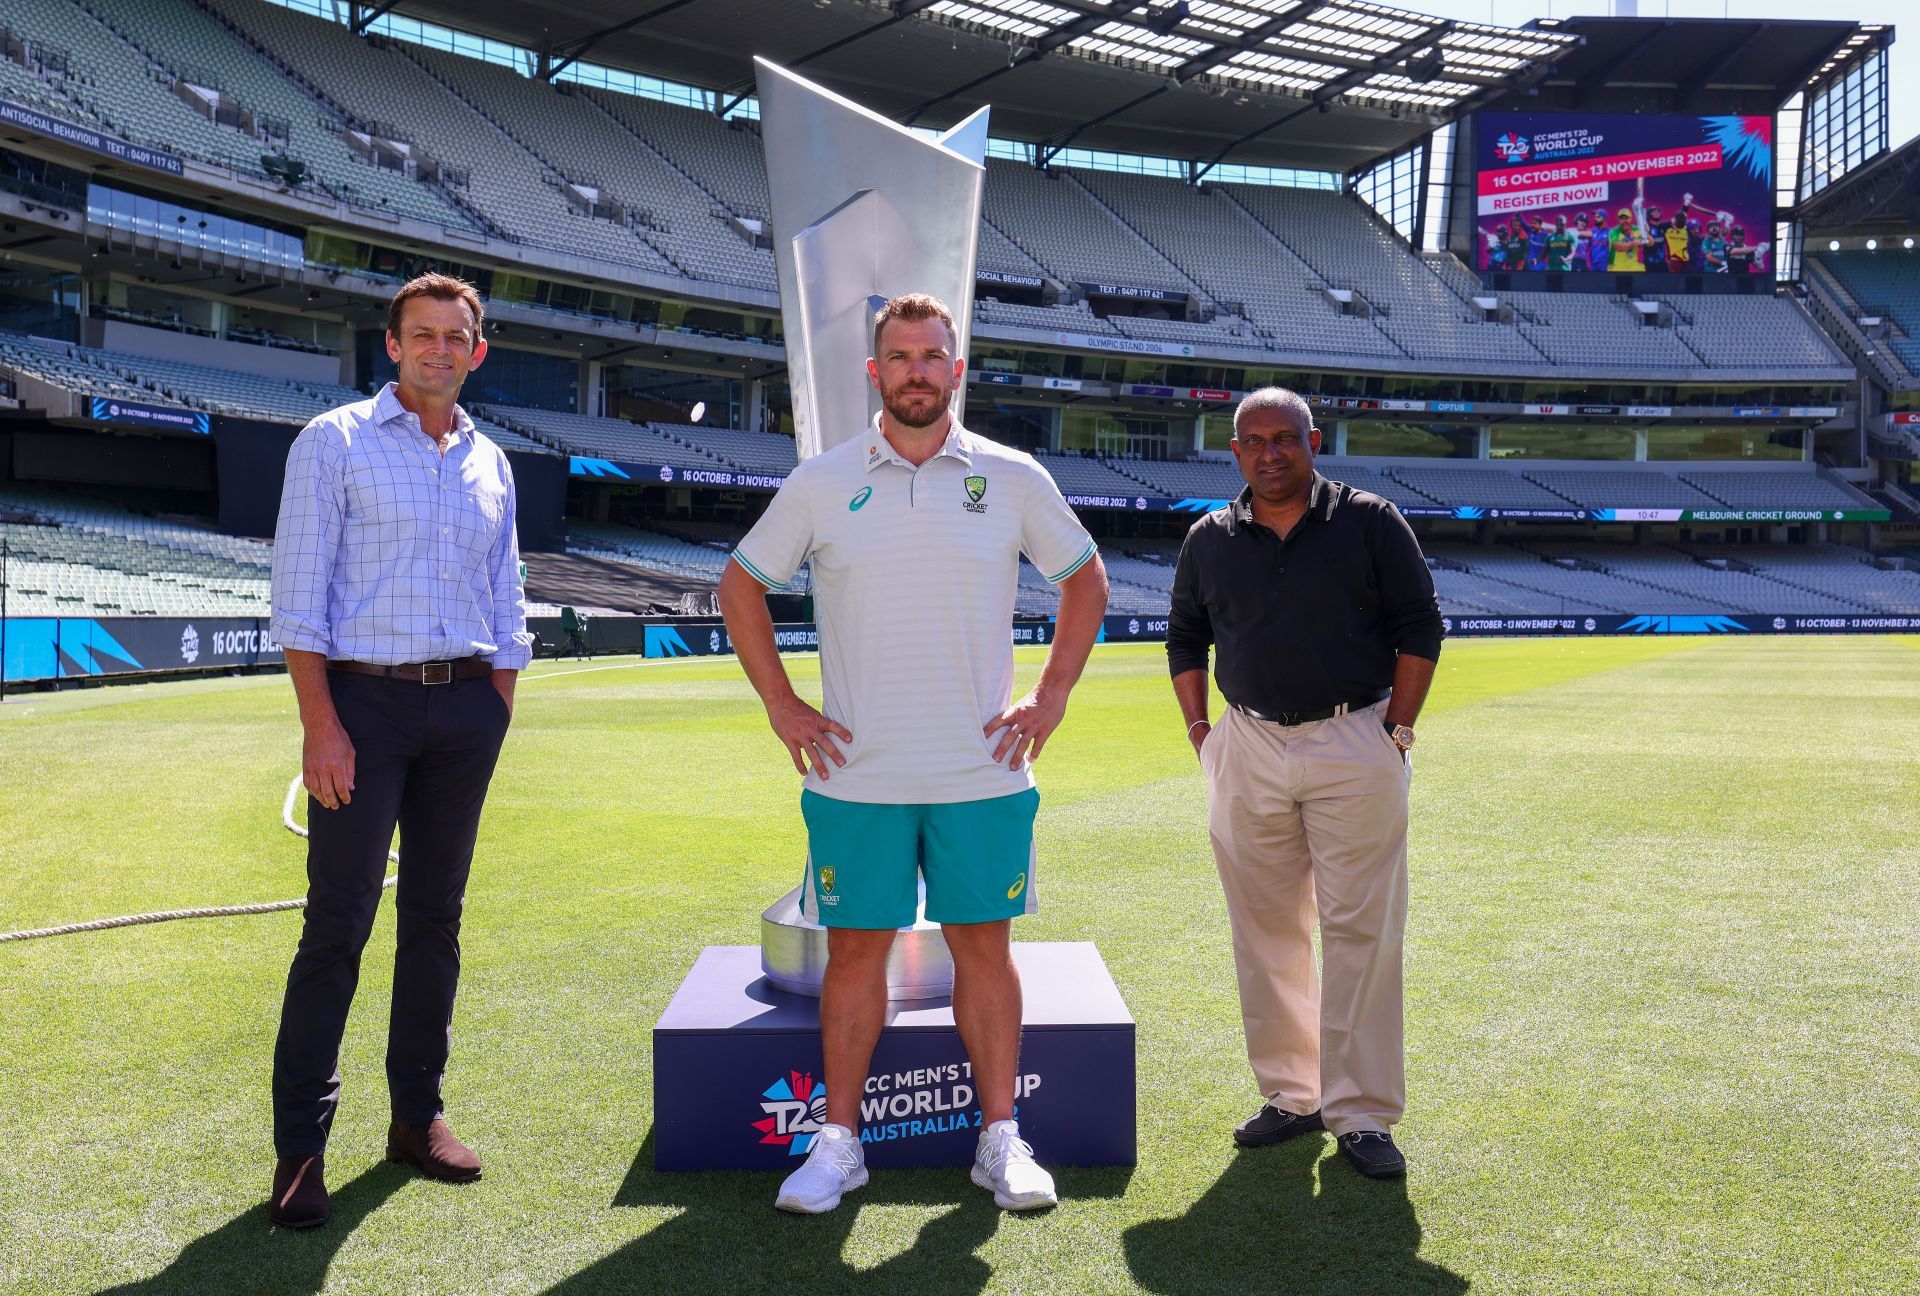 From left to right, Adam Gilchrist, Aaron Finch and Aravinda de Silva at the T20 World Cup 2022 fixture launch. Pic: Getty Images T20 World Cup 2022